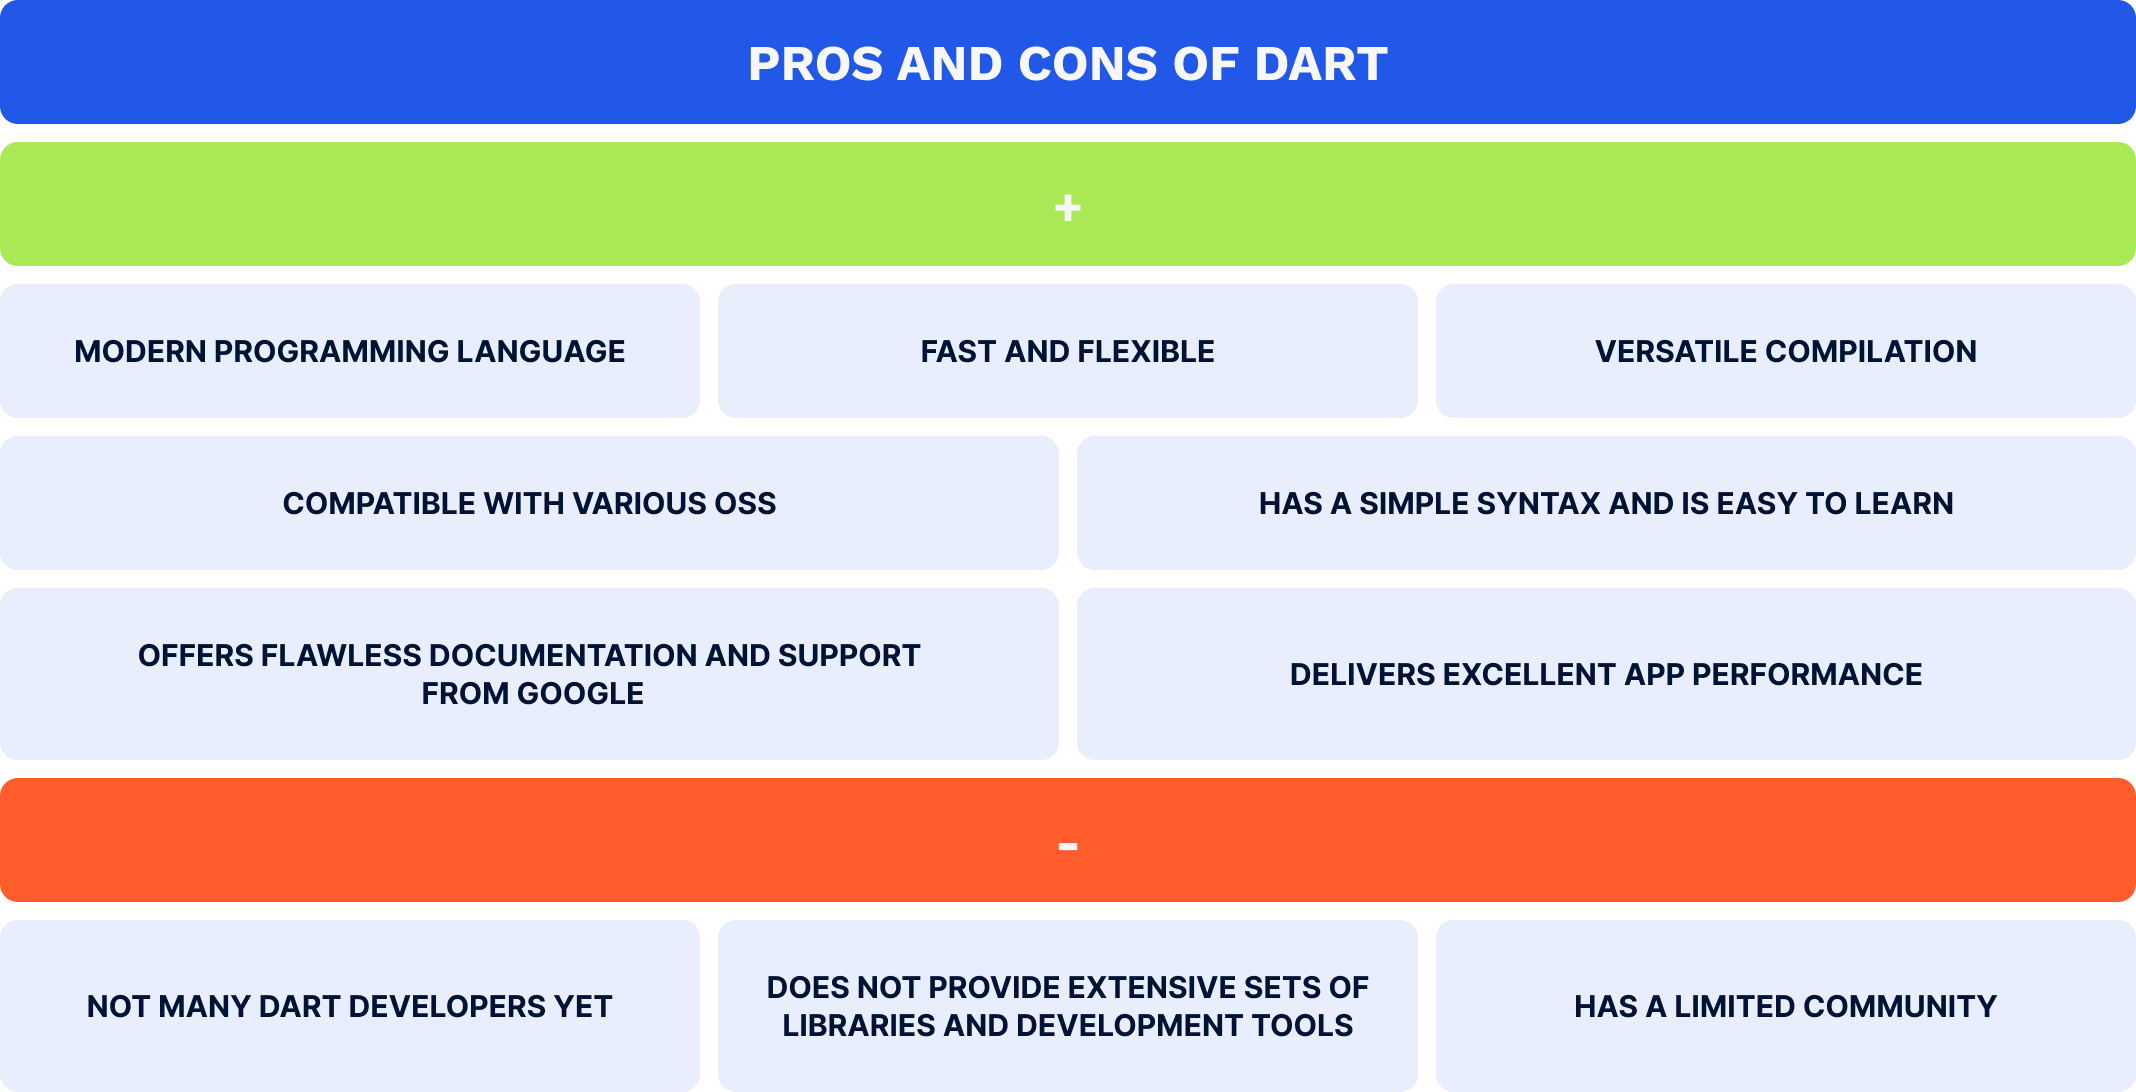 Pros and cons of Dart